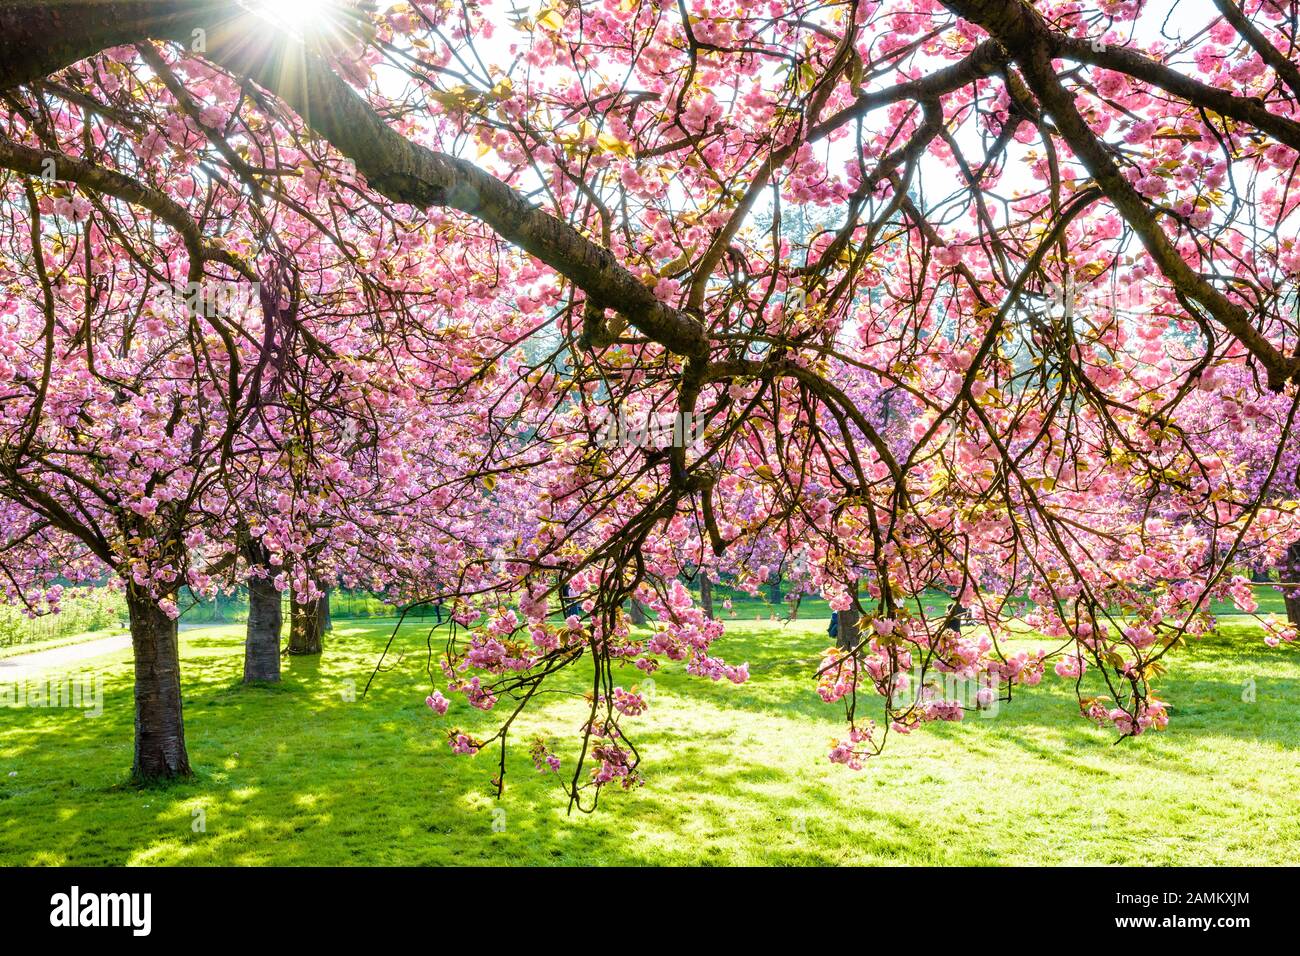 Branches of a blossoming Japanese cherry tree laden with clusters of pink flowers in a grassy meadow by a sunny spring afternoon. Stock Photo